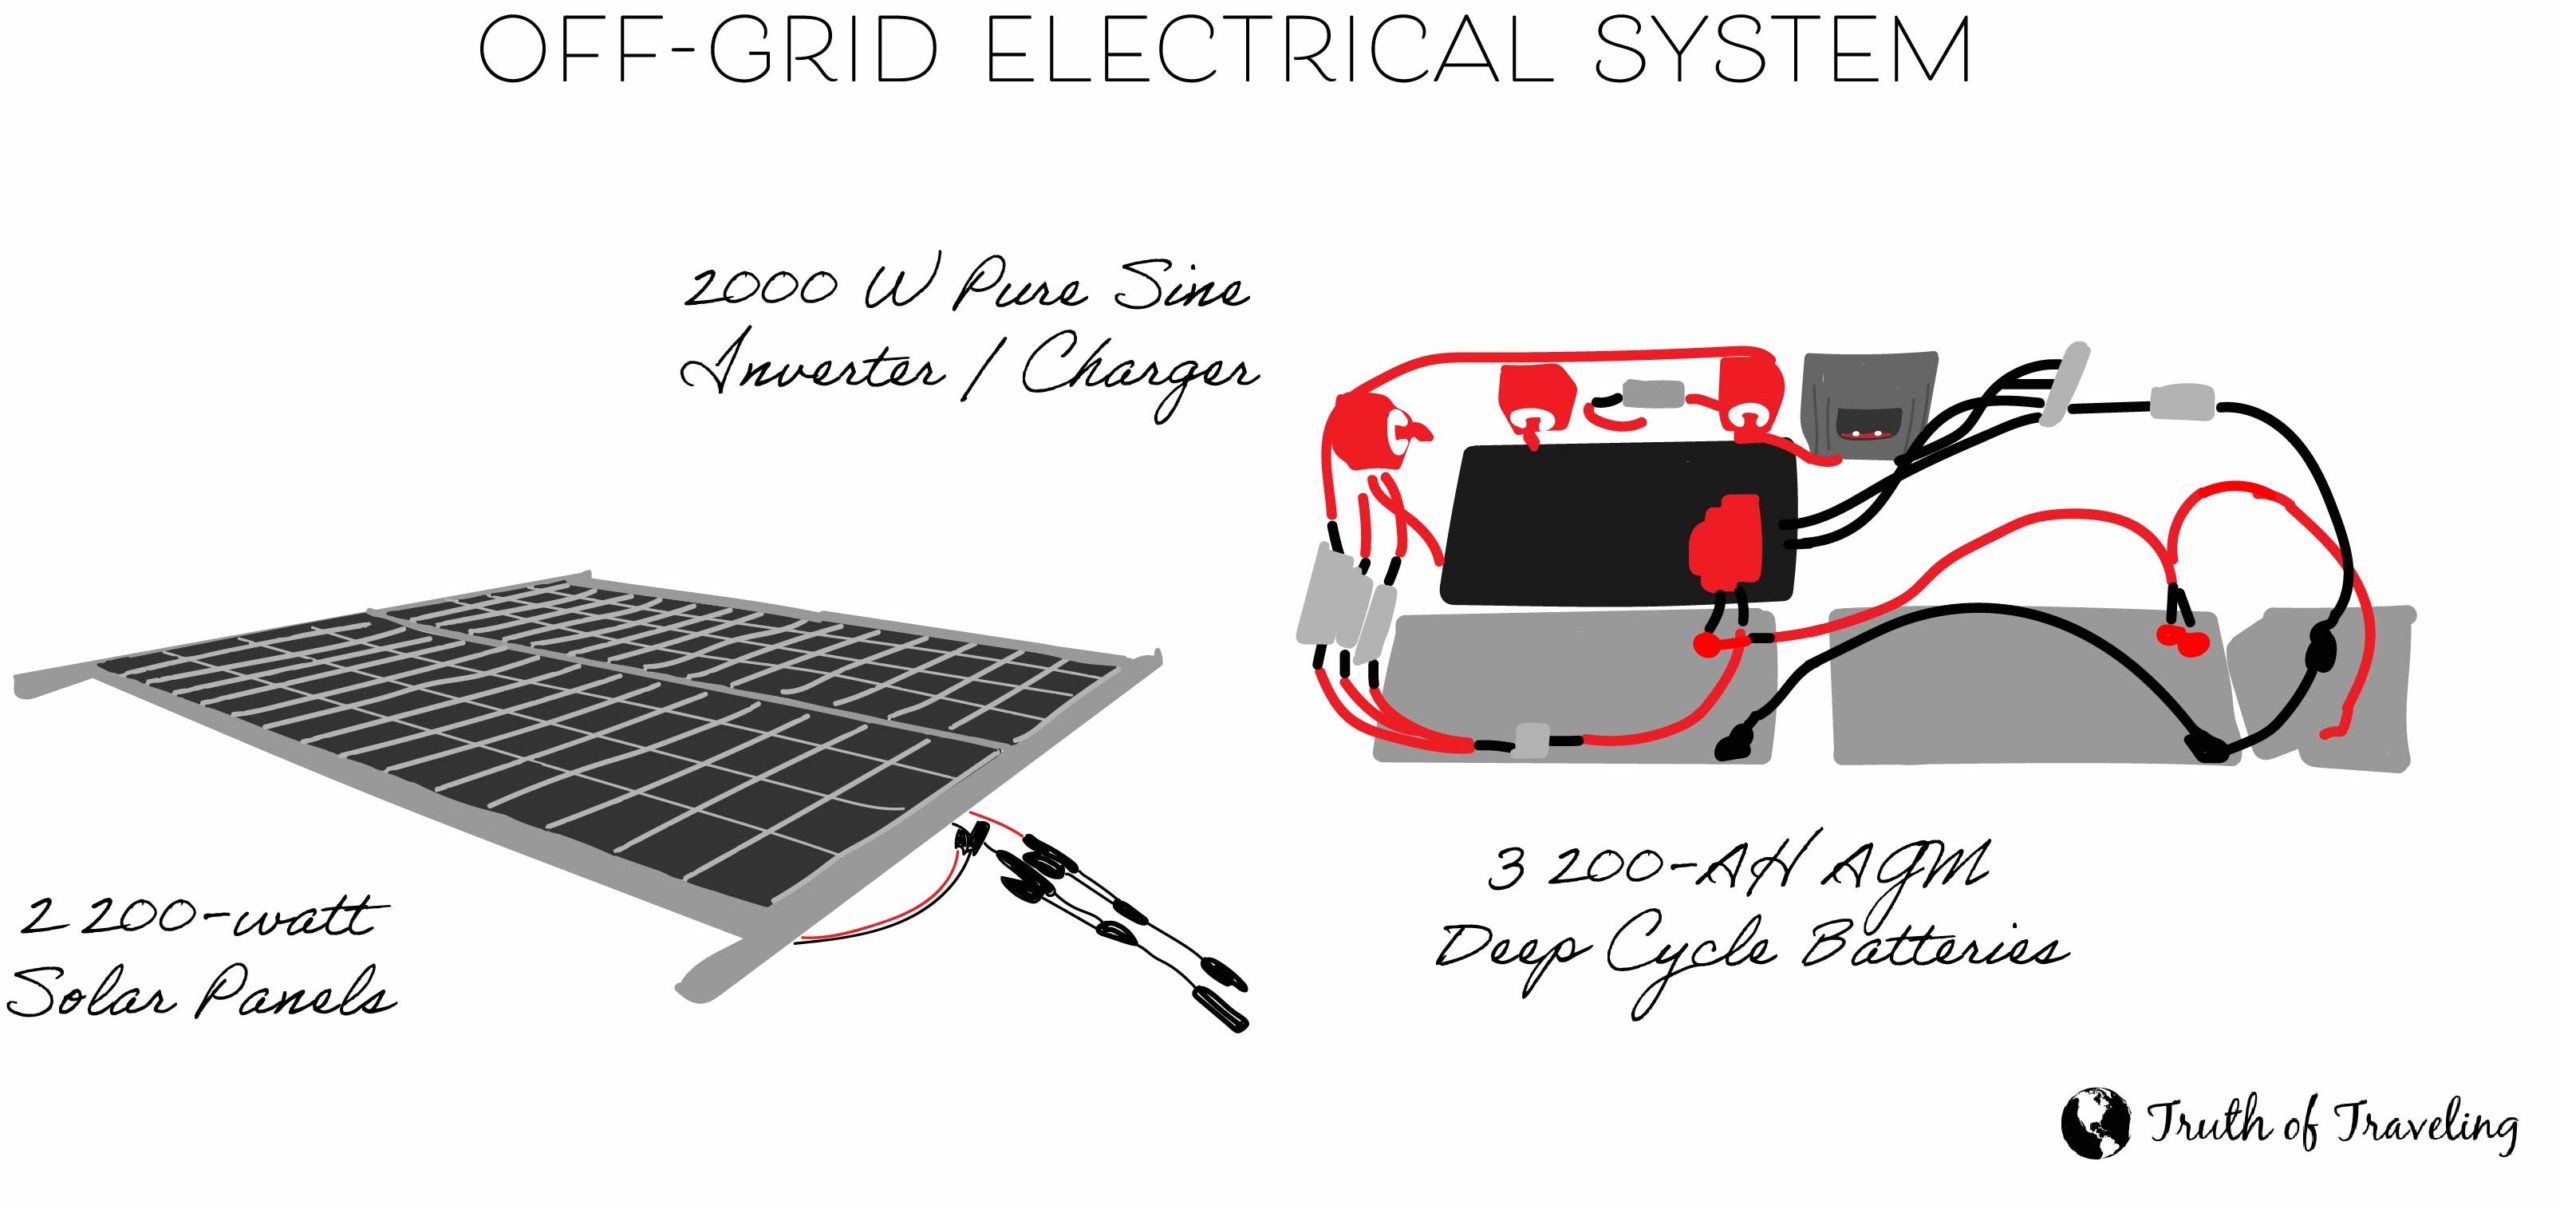 Off-Grid electrical system- 2 200-watt solar panels, 2000W pure sine interverter/charger, 3 200-AH AGM deep cycle batteries